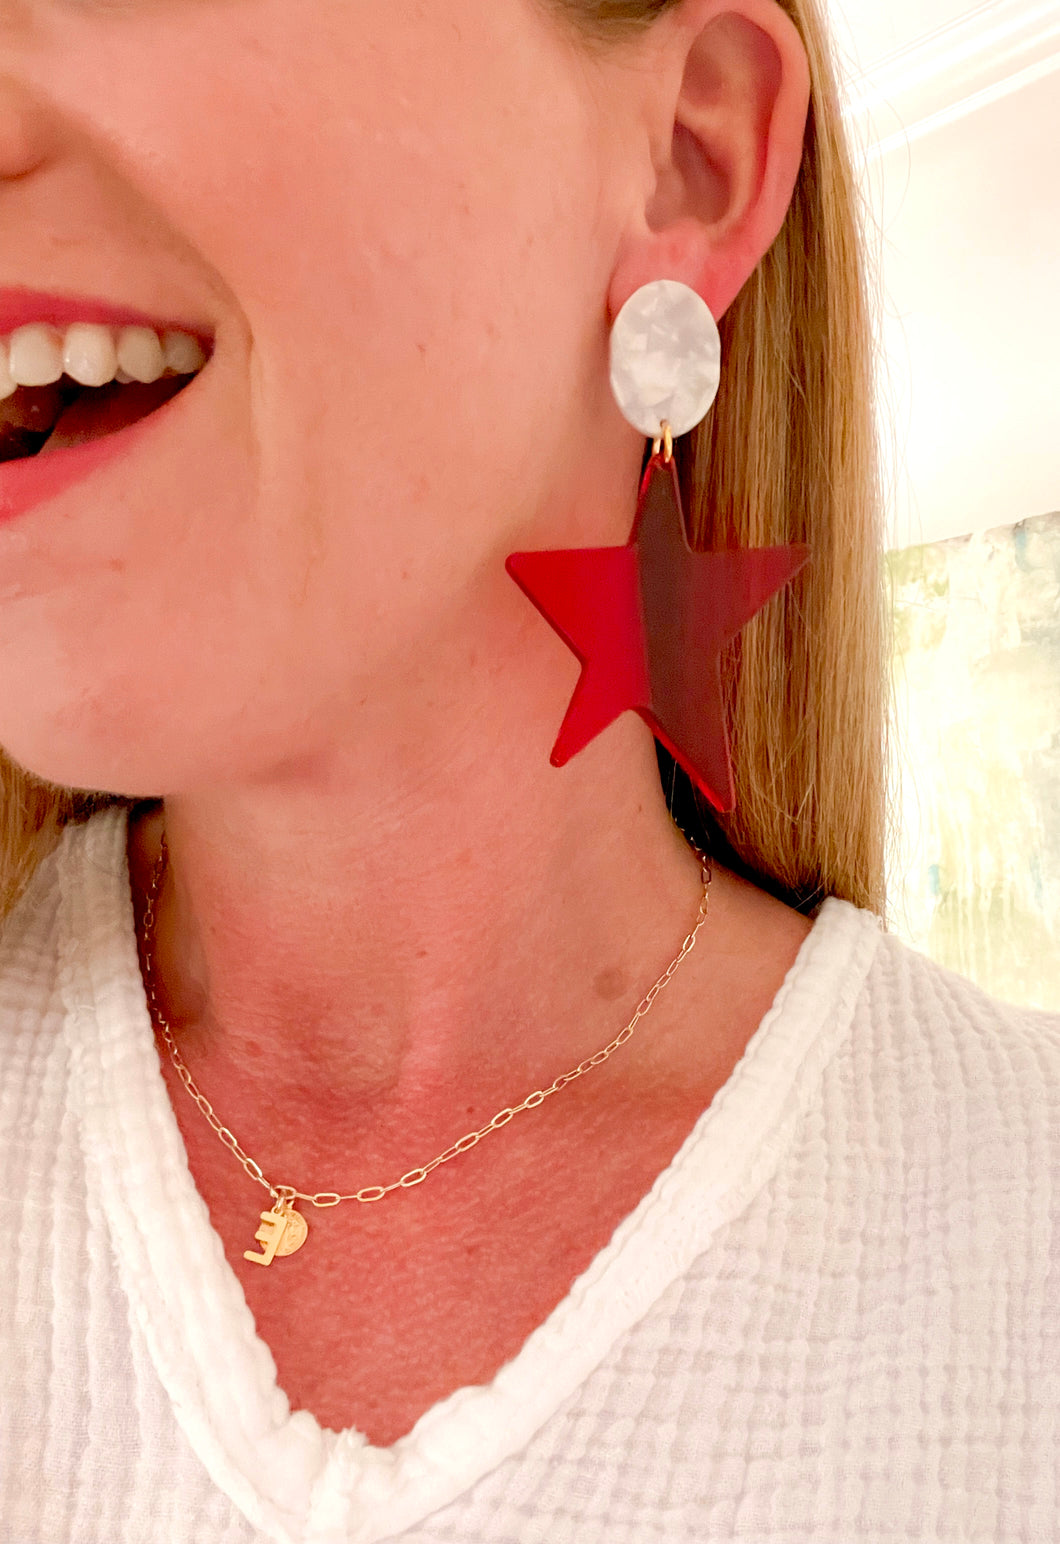 The Red Star Earrings